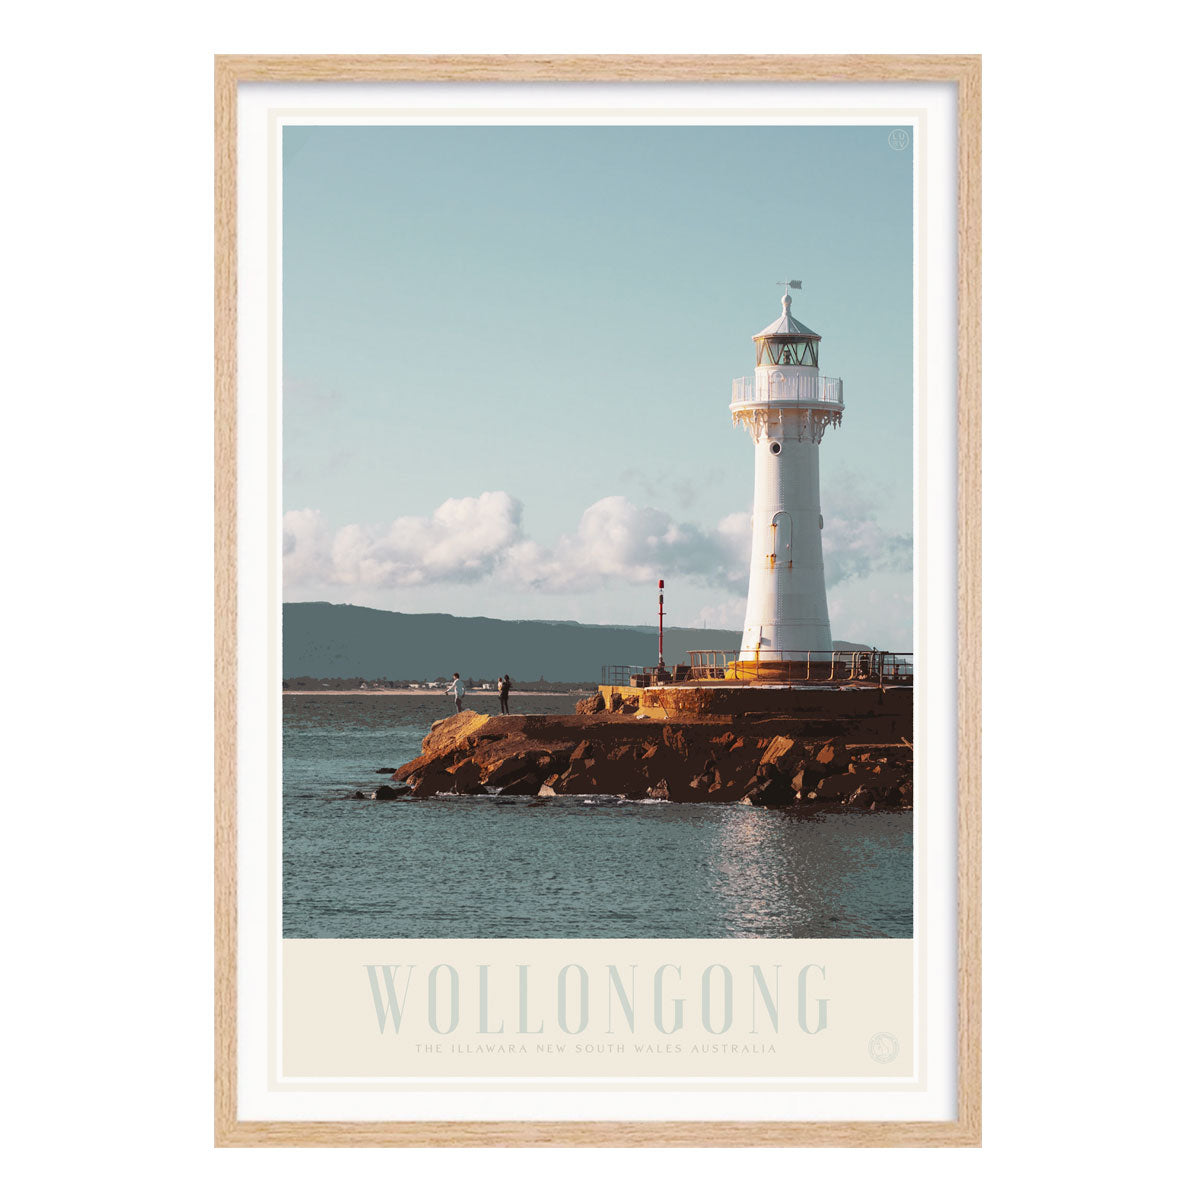 Wollongong NSW vintage retro travel poster print in oak frame by Places We Luv